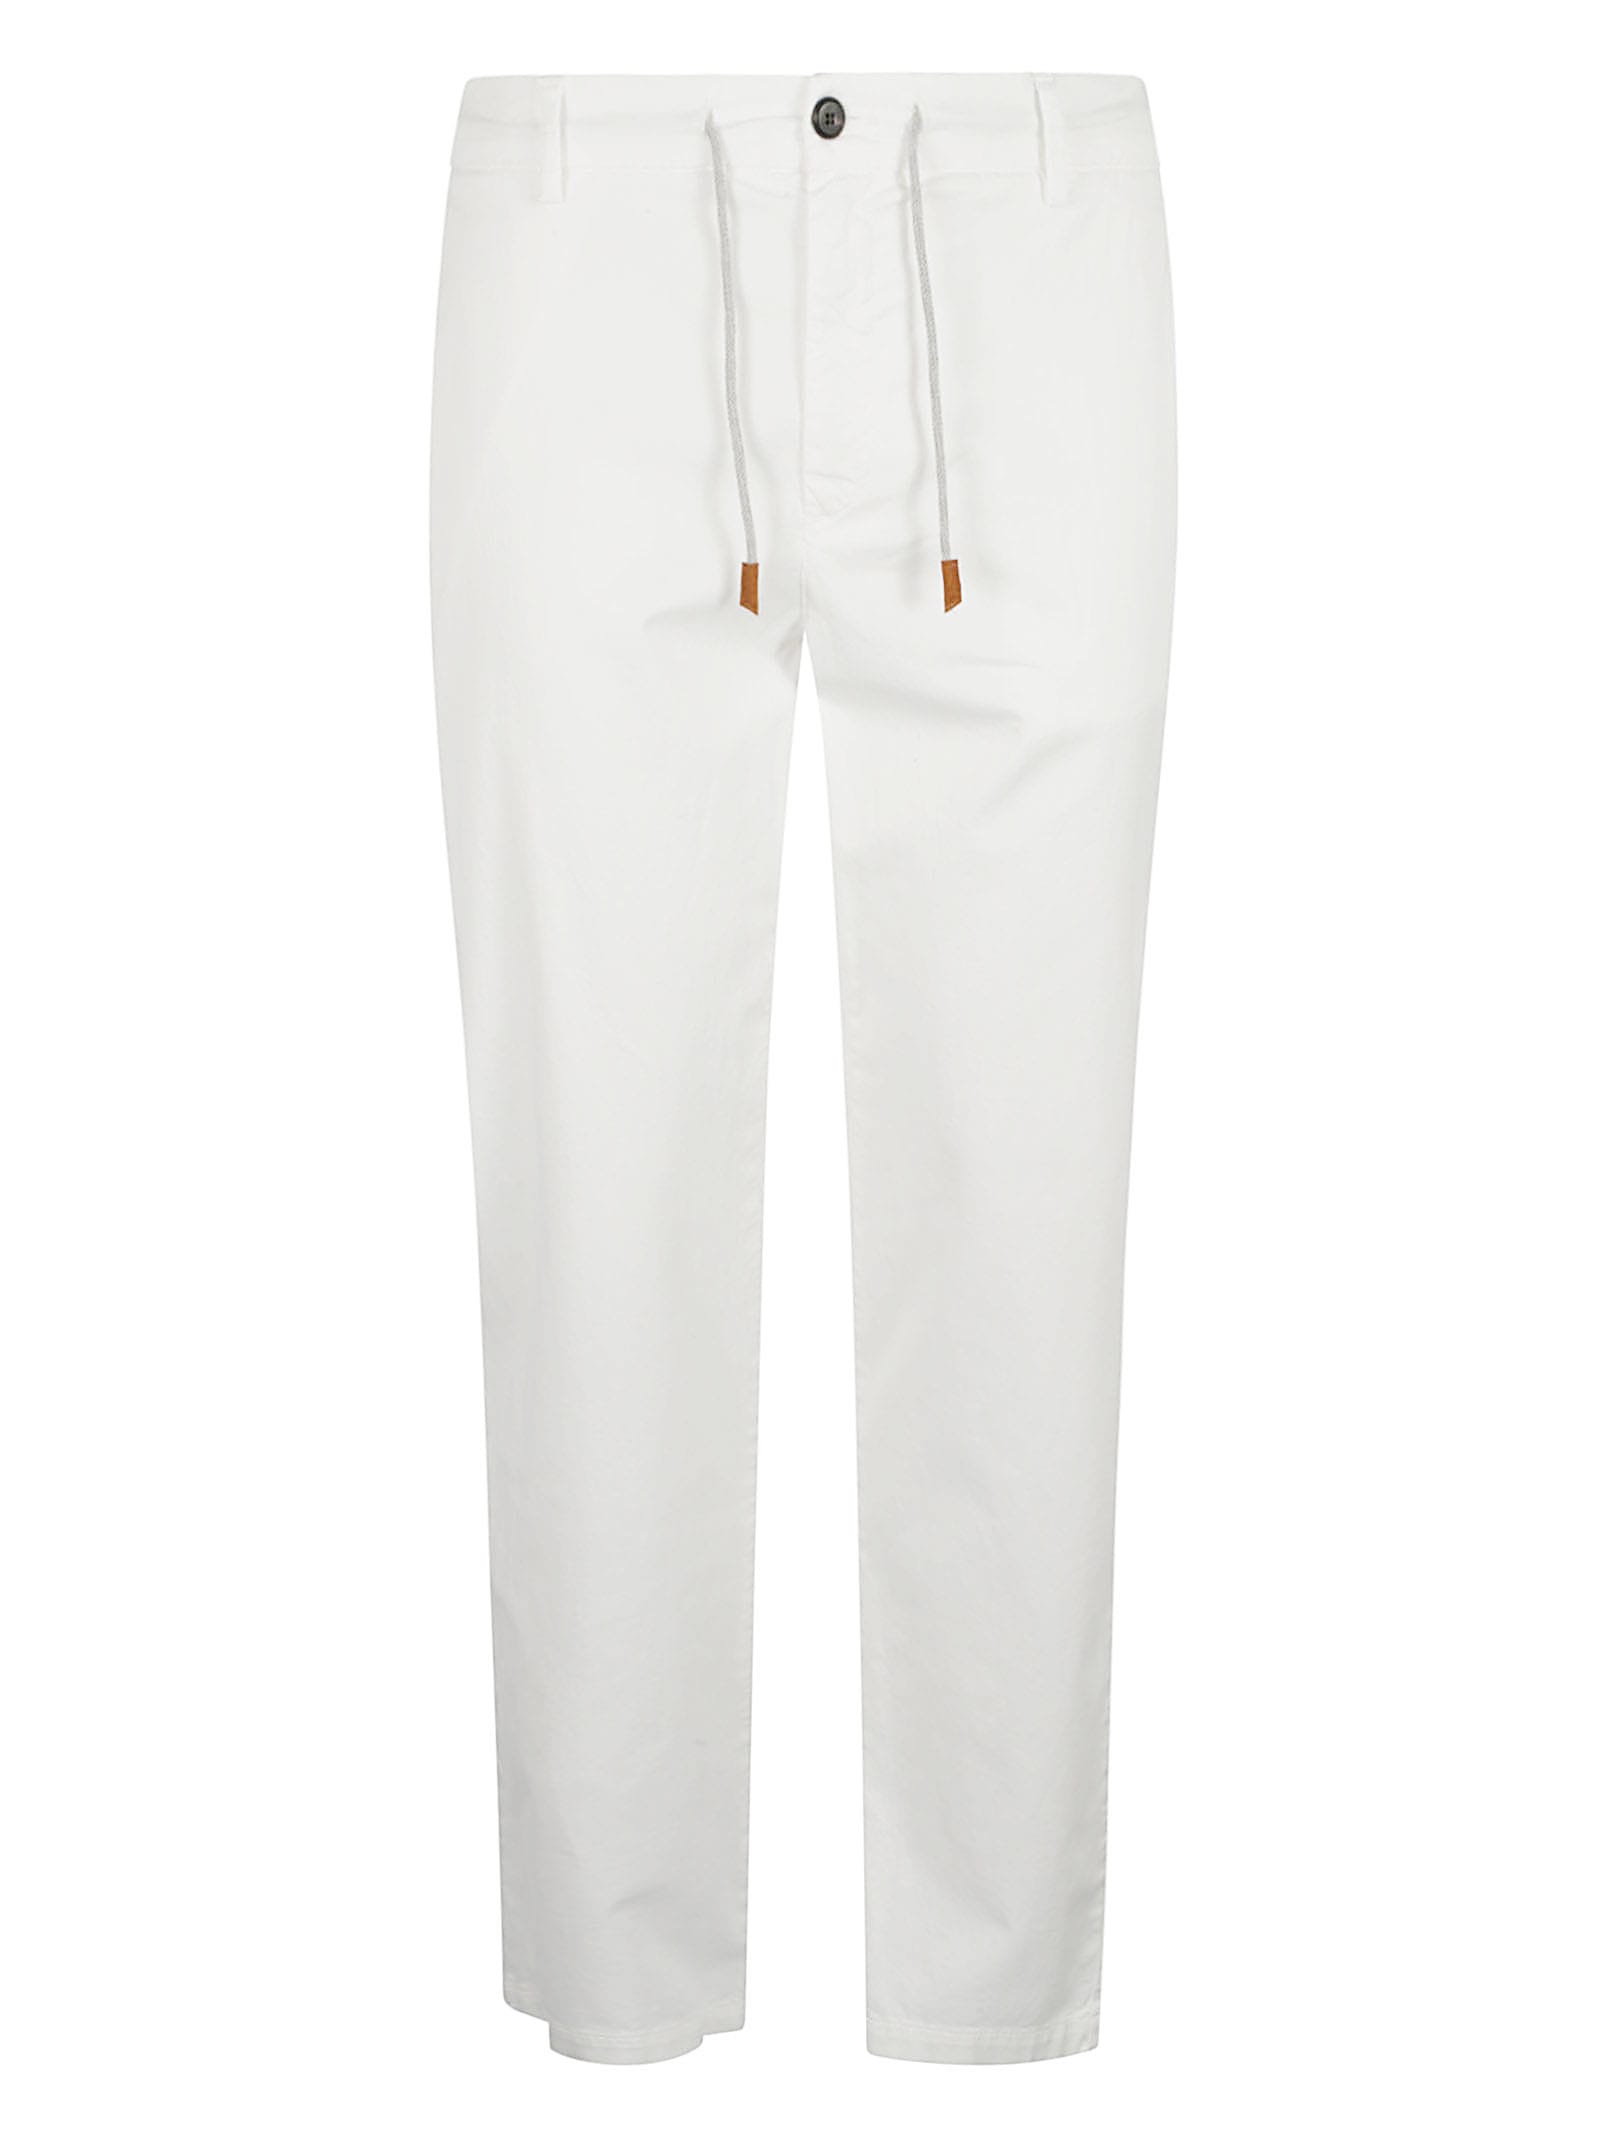 Drawstringed Buttoned Trousers